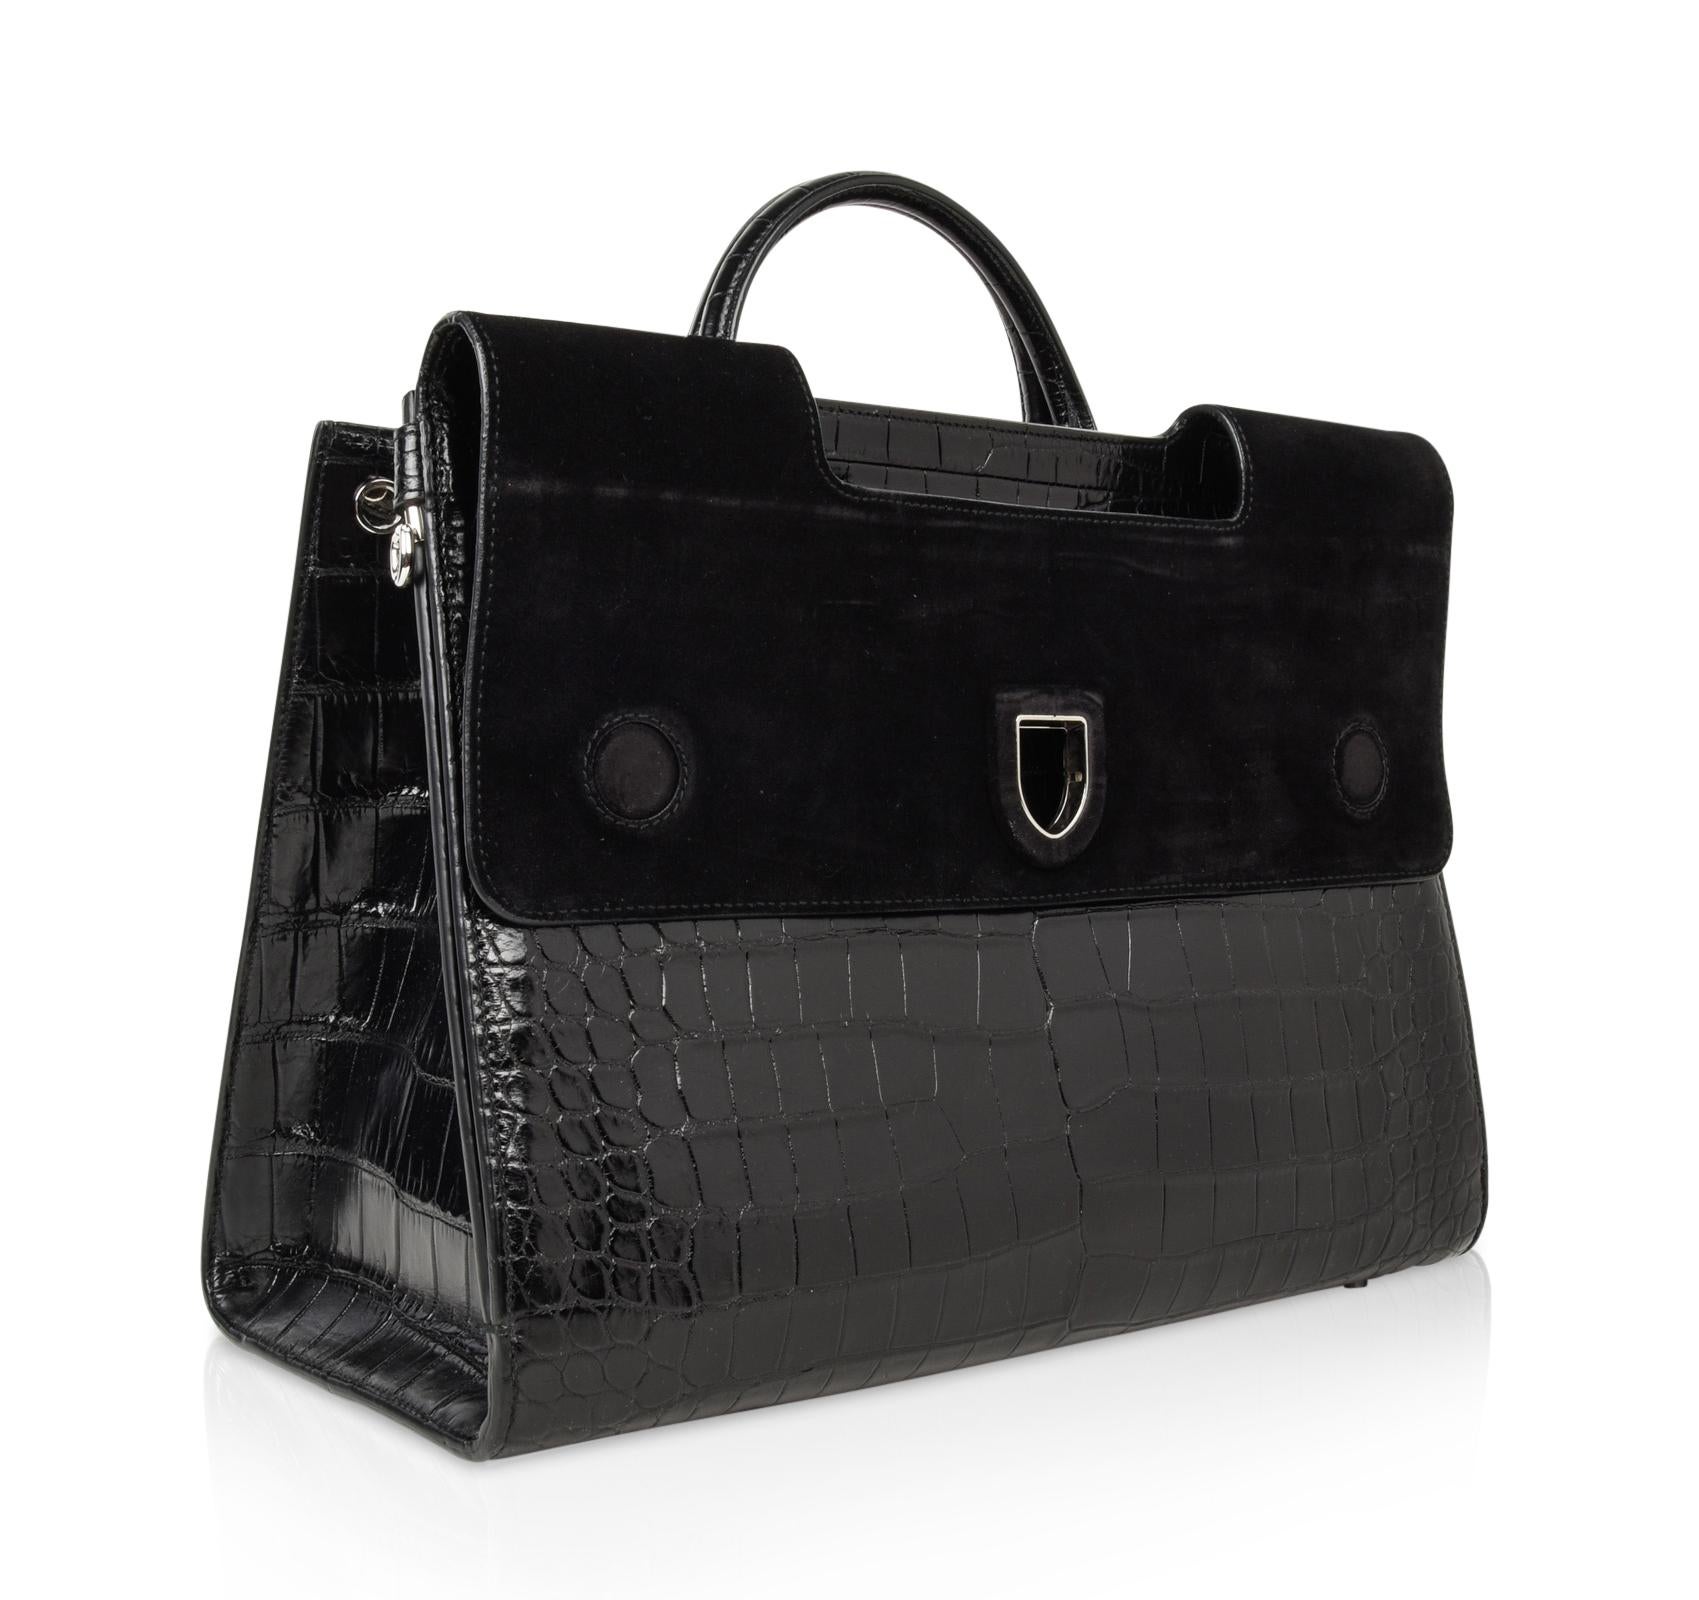 Guaranteed authentic rare Christian Dior Diorever matte crocodile Black bag which converts to a tote style.
Architectural flap with cutout for handles opens to black suede under the flap. 
The flap is held with hidden magnets both front and rear so